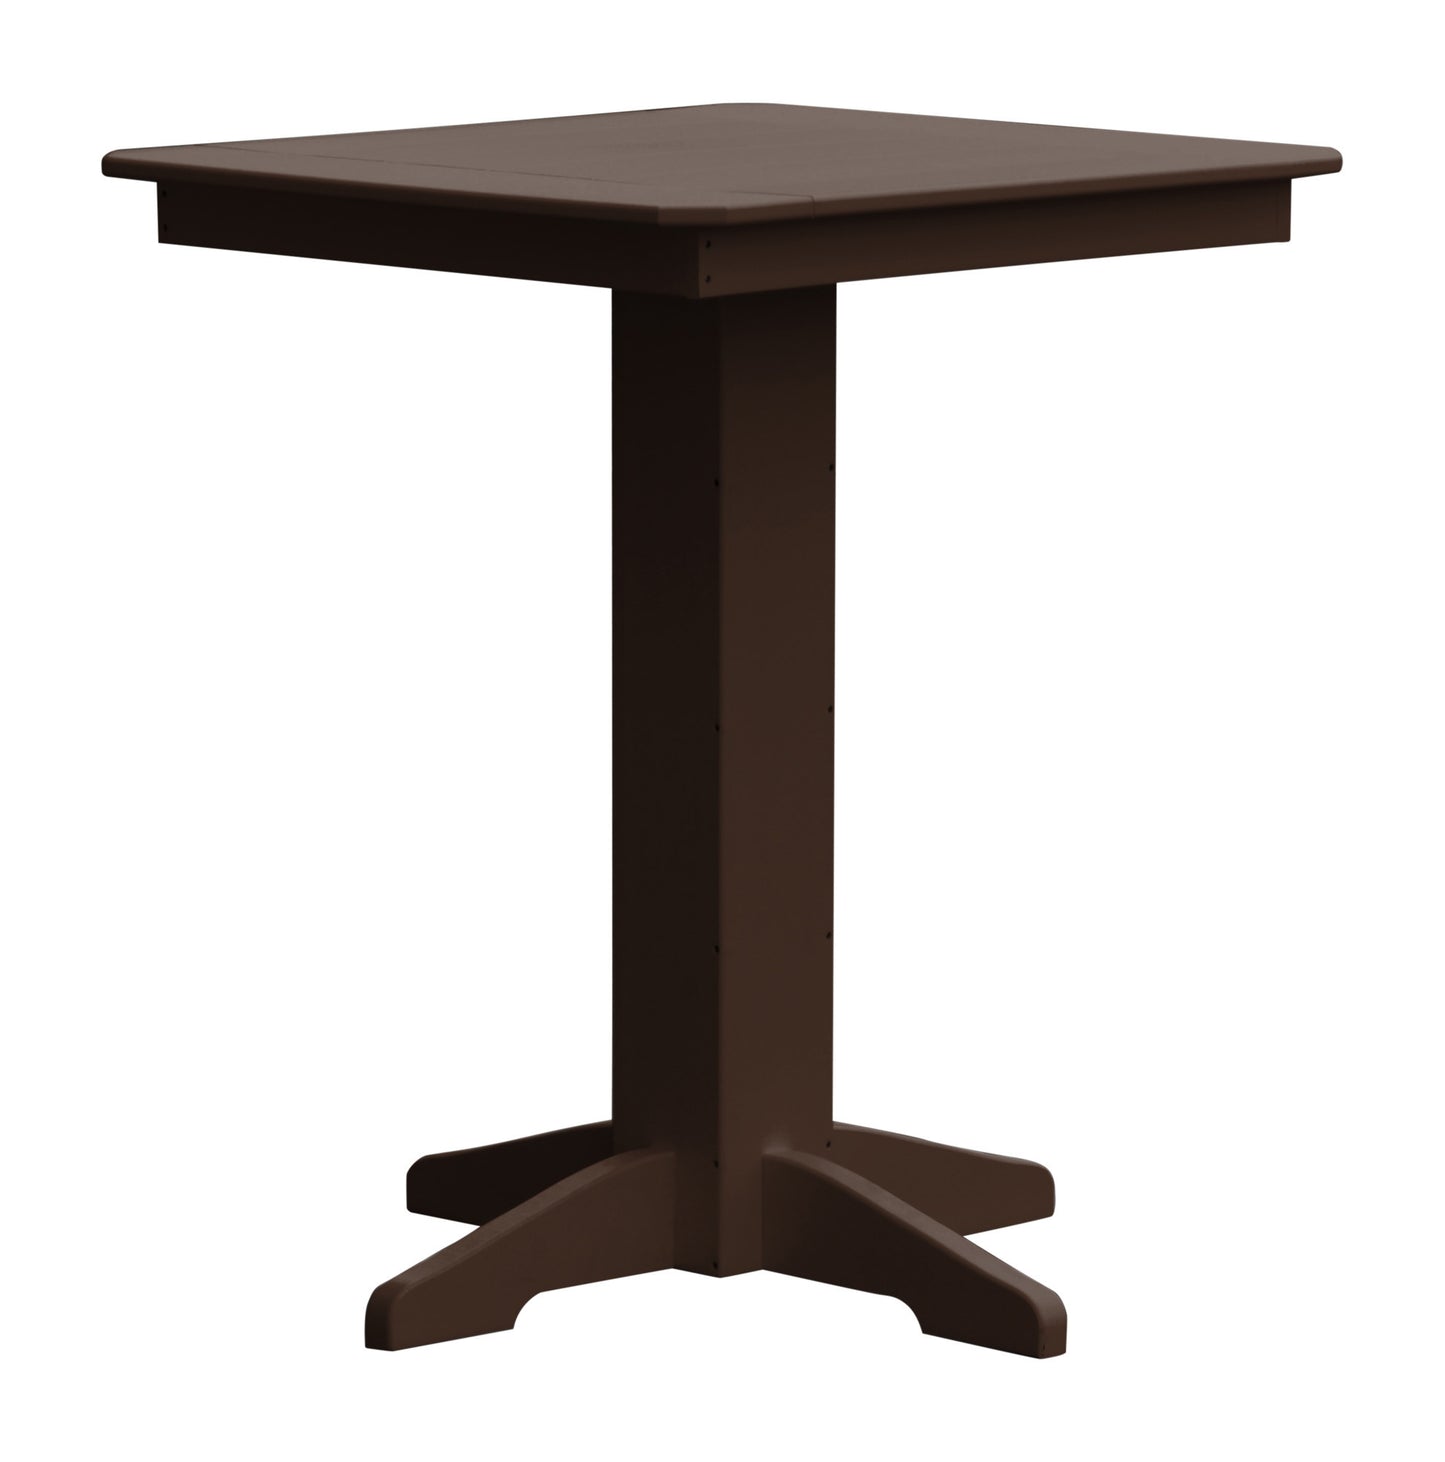 A&L Furniture Recycled Plastic 33" Square Bar Table - Tudor Brown